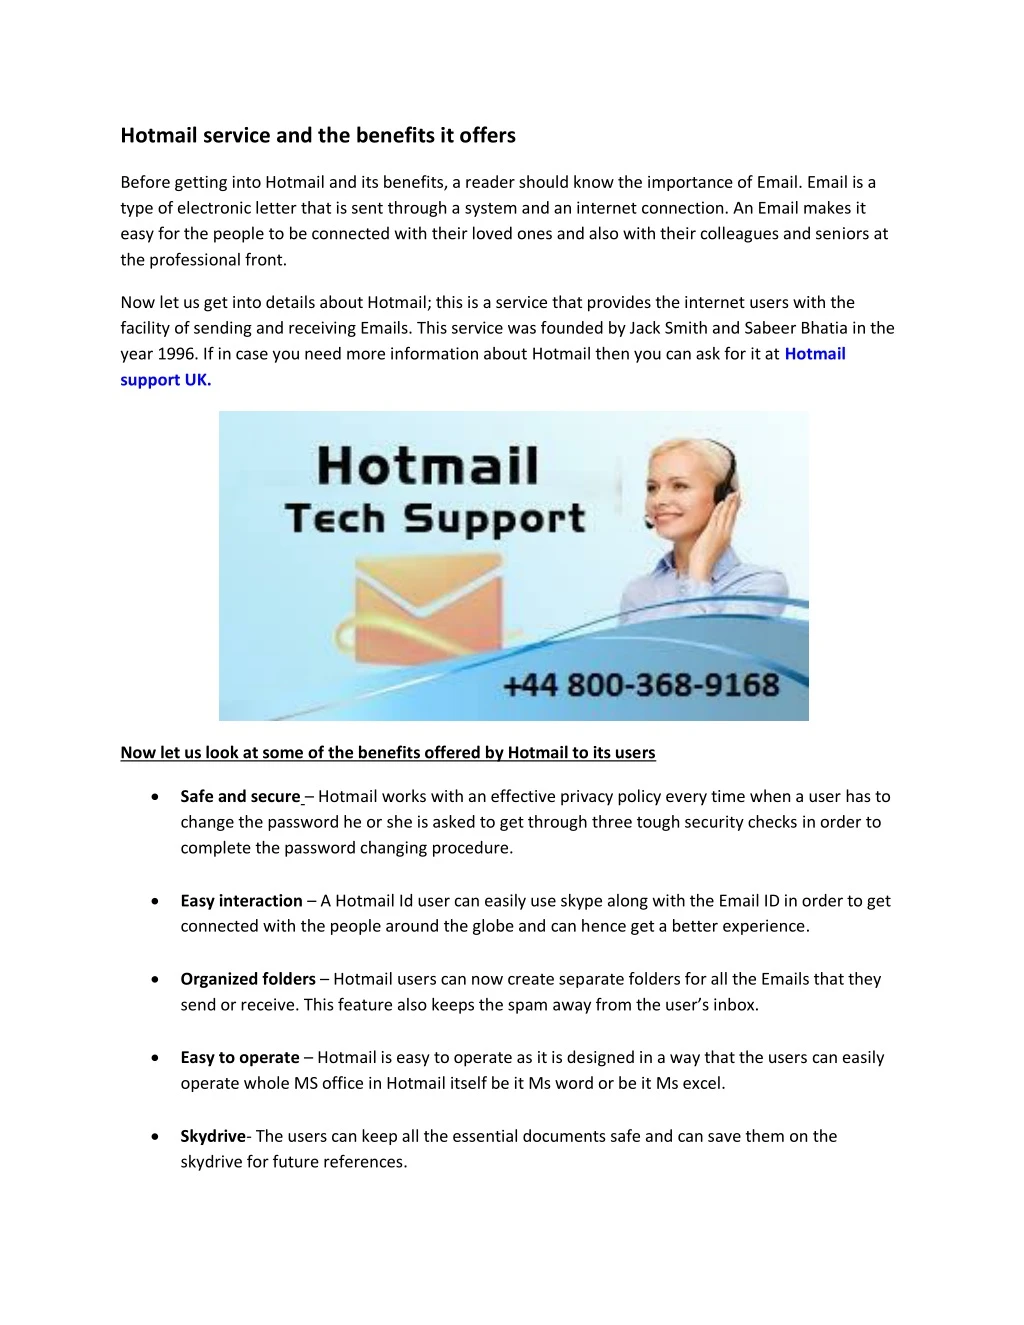 hotmail service and the benefits it offers